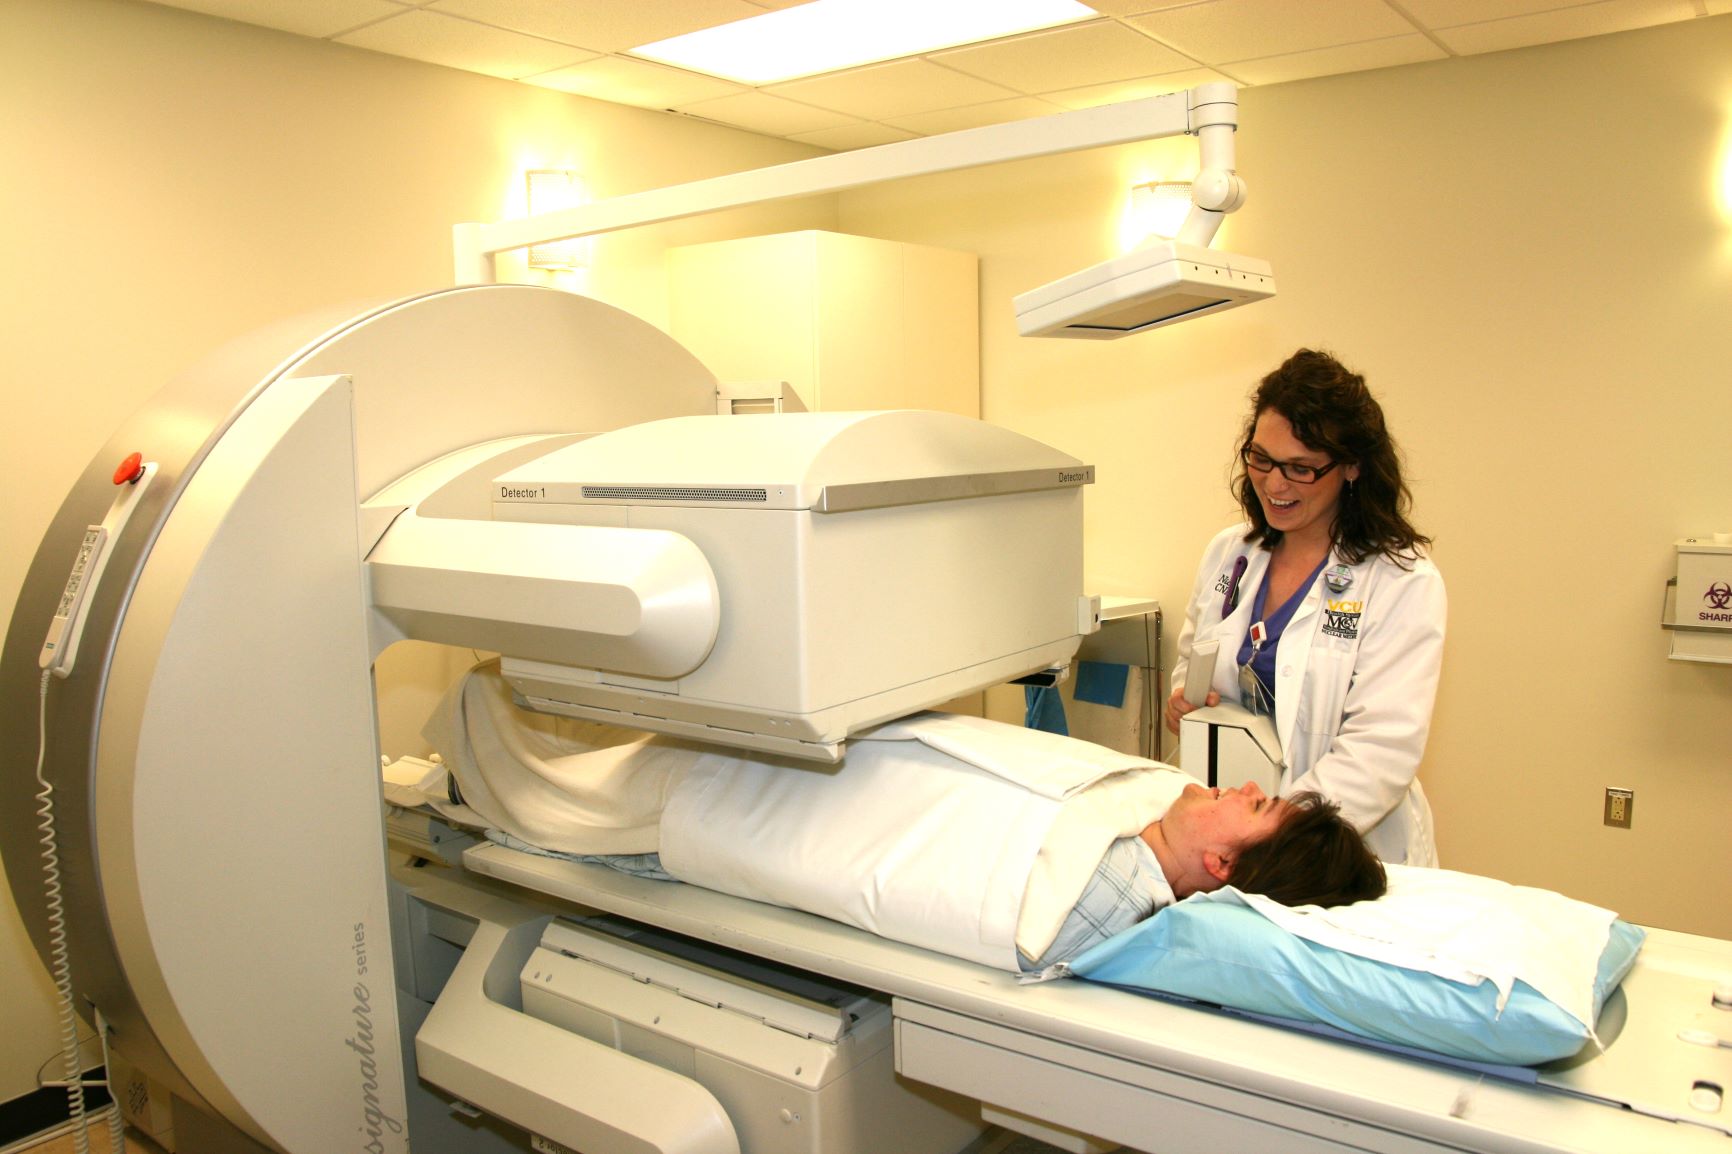 Nuclear Medicine: Diagnosing and treating a variety of diseases with radioactive material and medical imaging